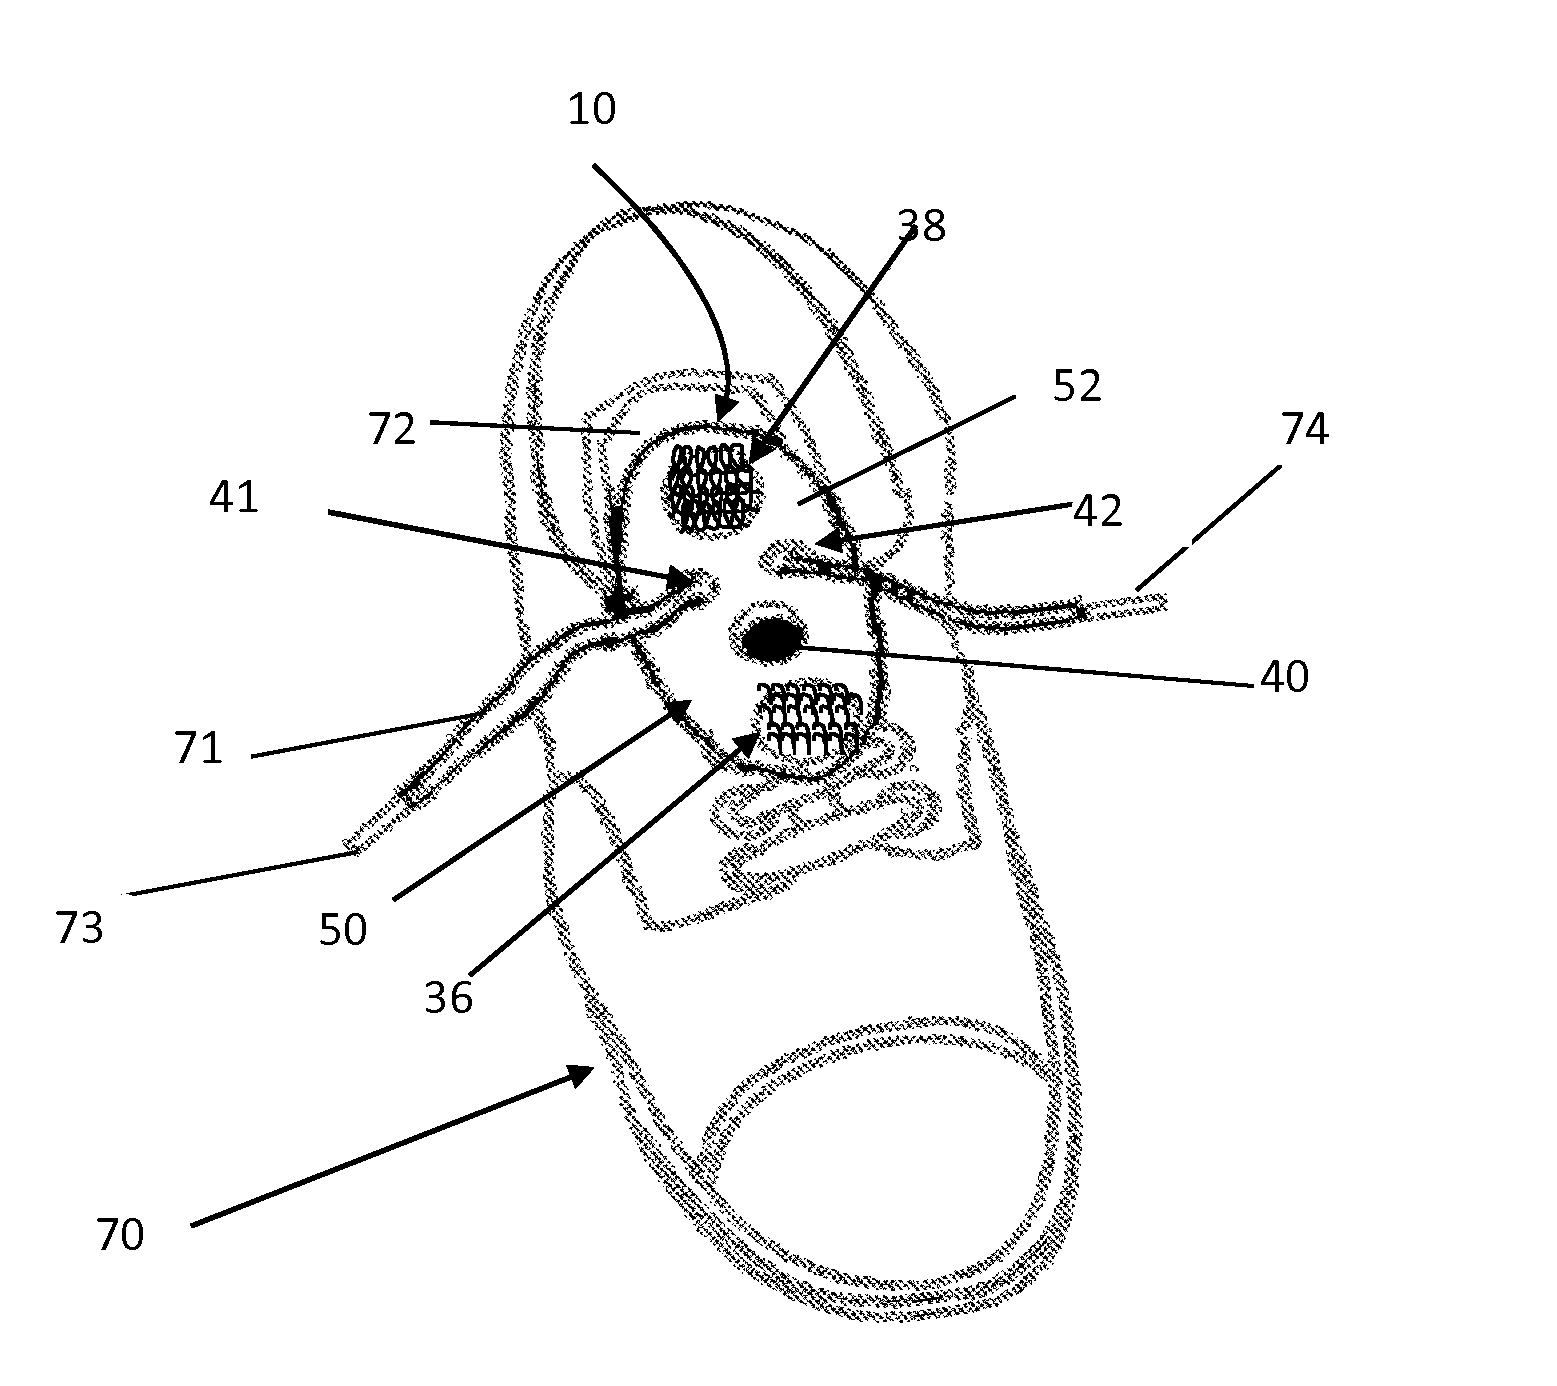 Device to secure shoelace knot